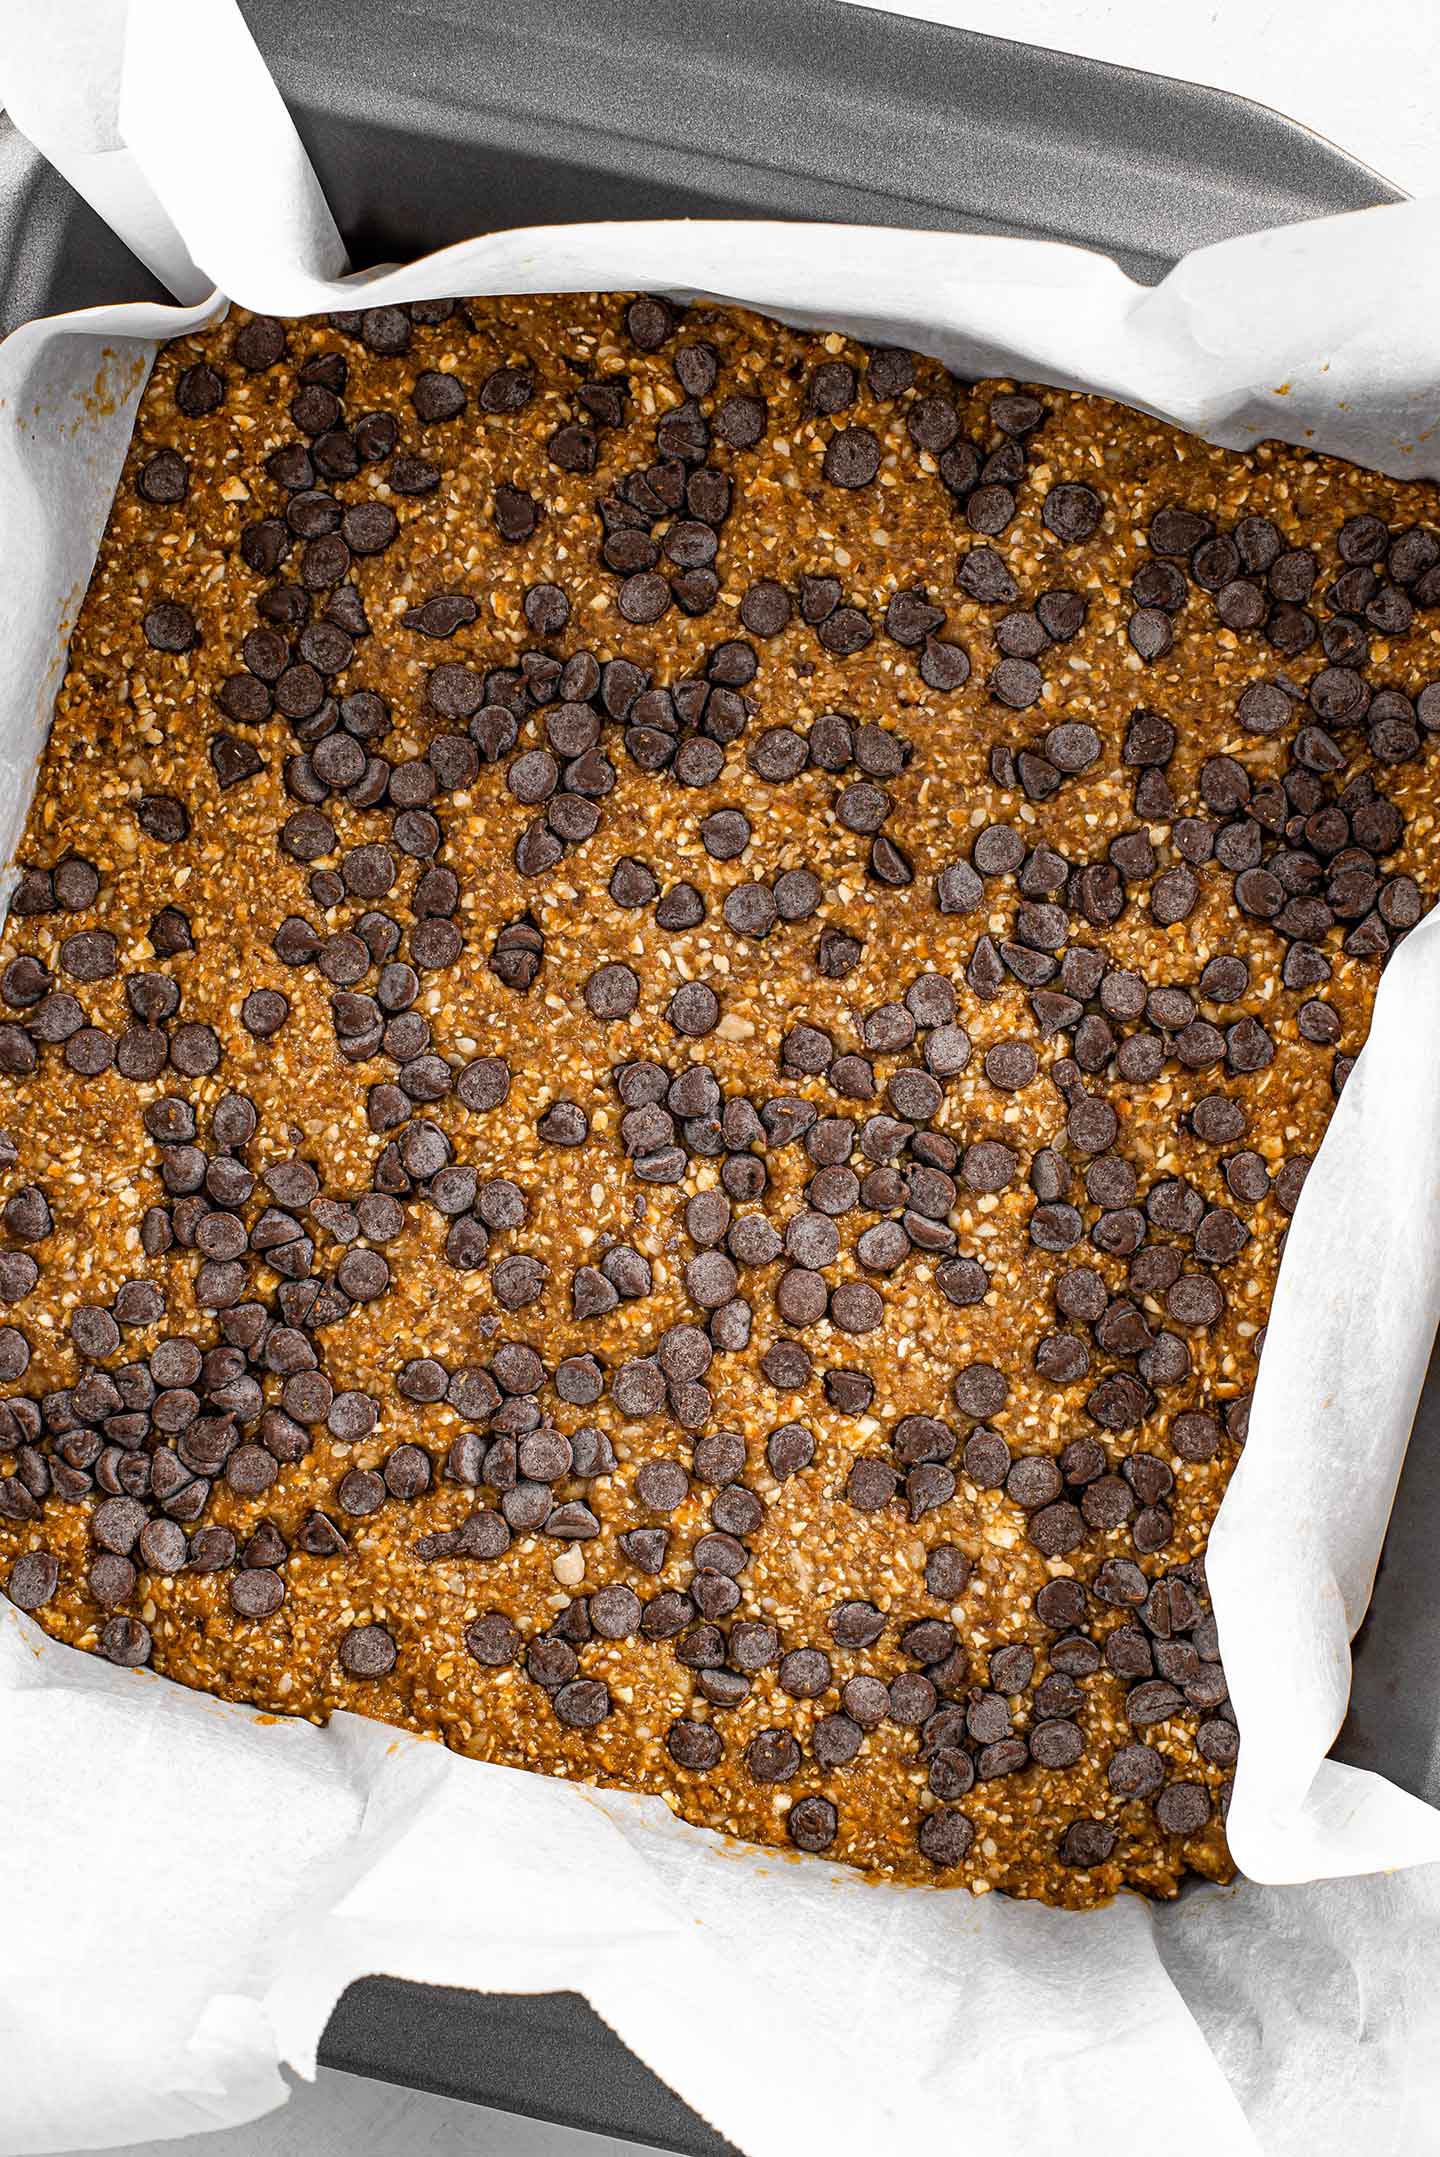 Top down view of the no bake chip bar dough setting in a baking pan with parchment paper. Chocolate chips are pressed into the top.